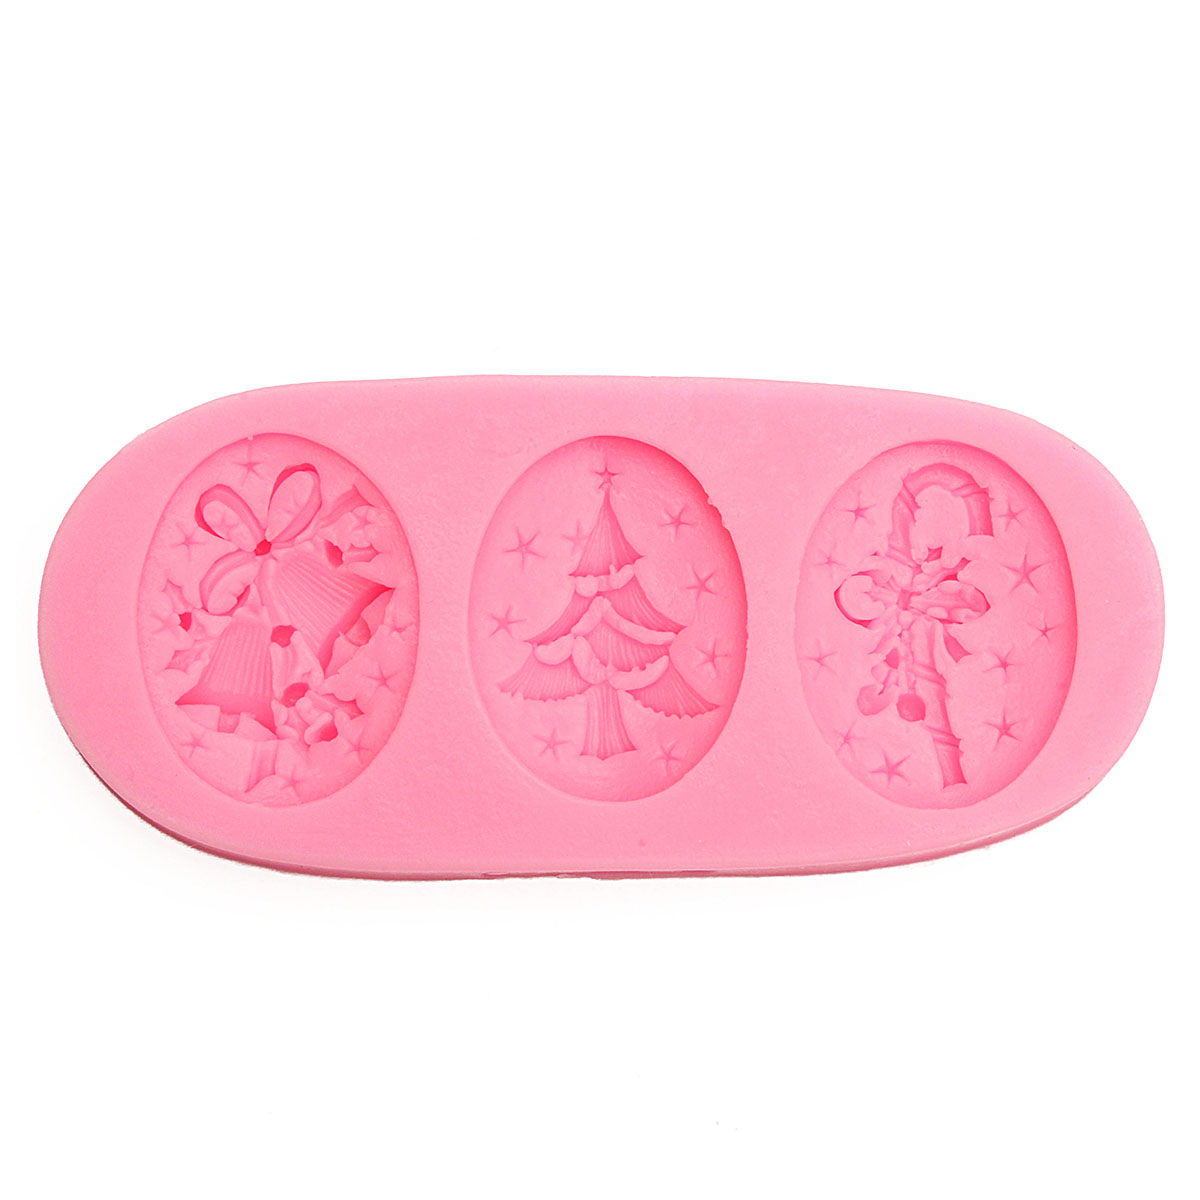 Christmas-Tree-Silicone-Fondant-Cake-Mold-Soap-Chocolate-Candy-Decorating-Mould-1589459-3